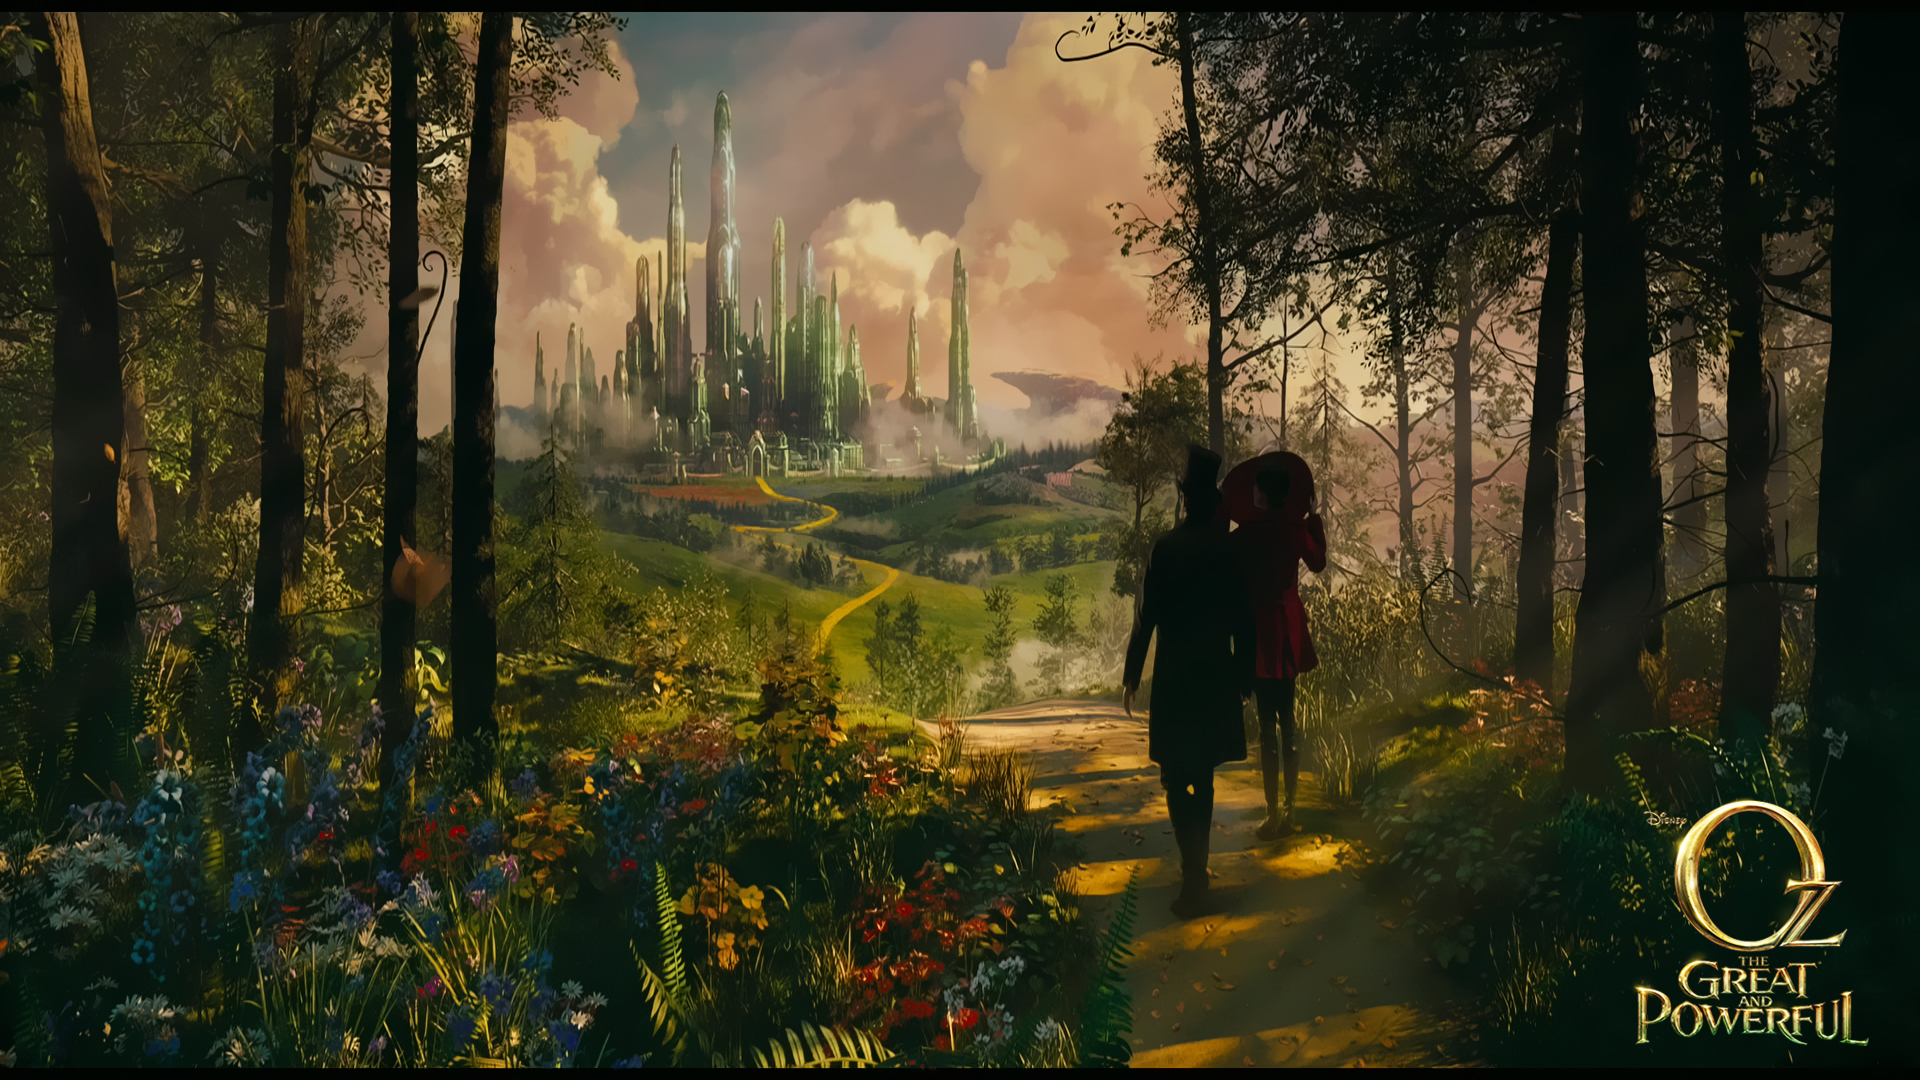 Oz The Great And Powerful Land - HD Wallpaper 